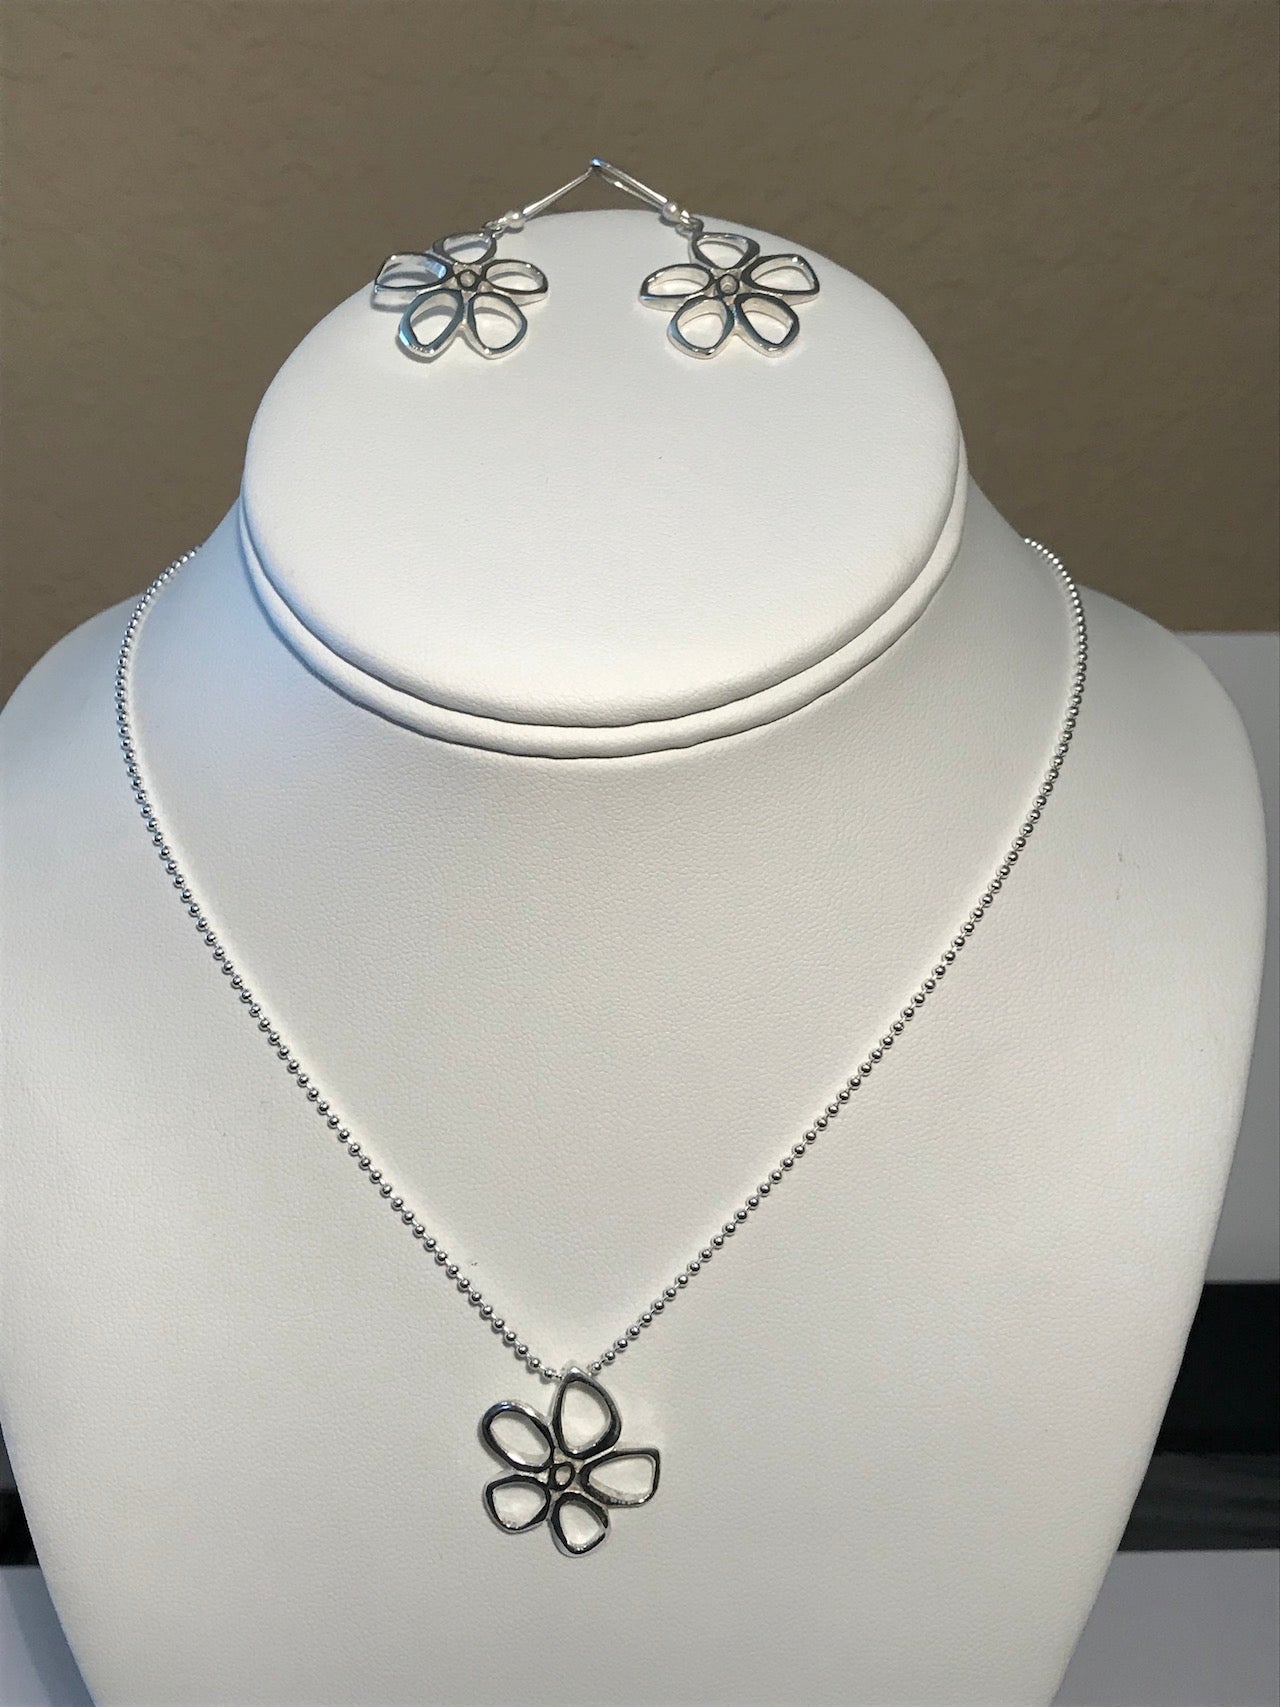 Star Flower Sterling Silver Necklace and Earrings Set